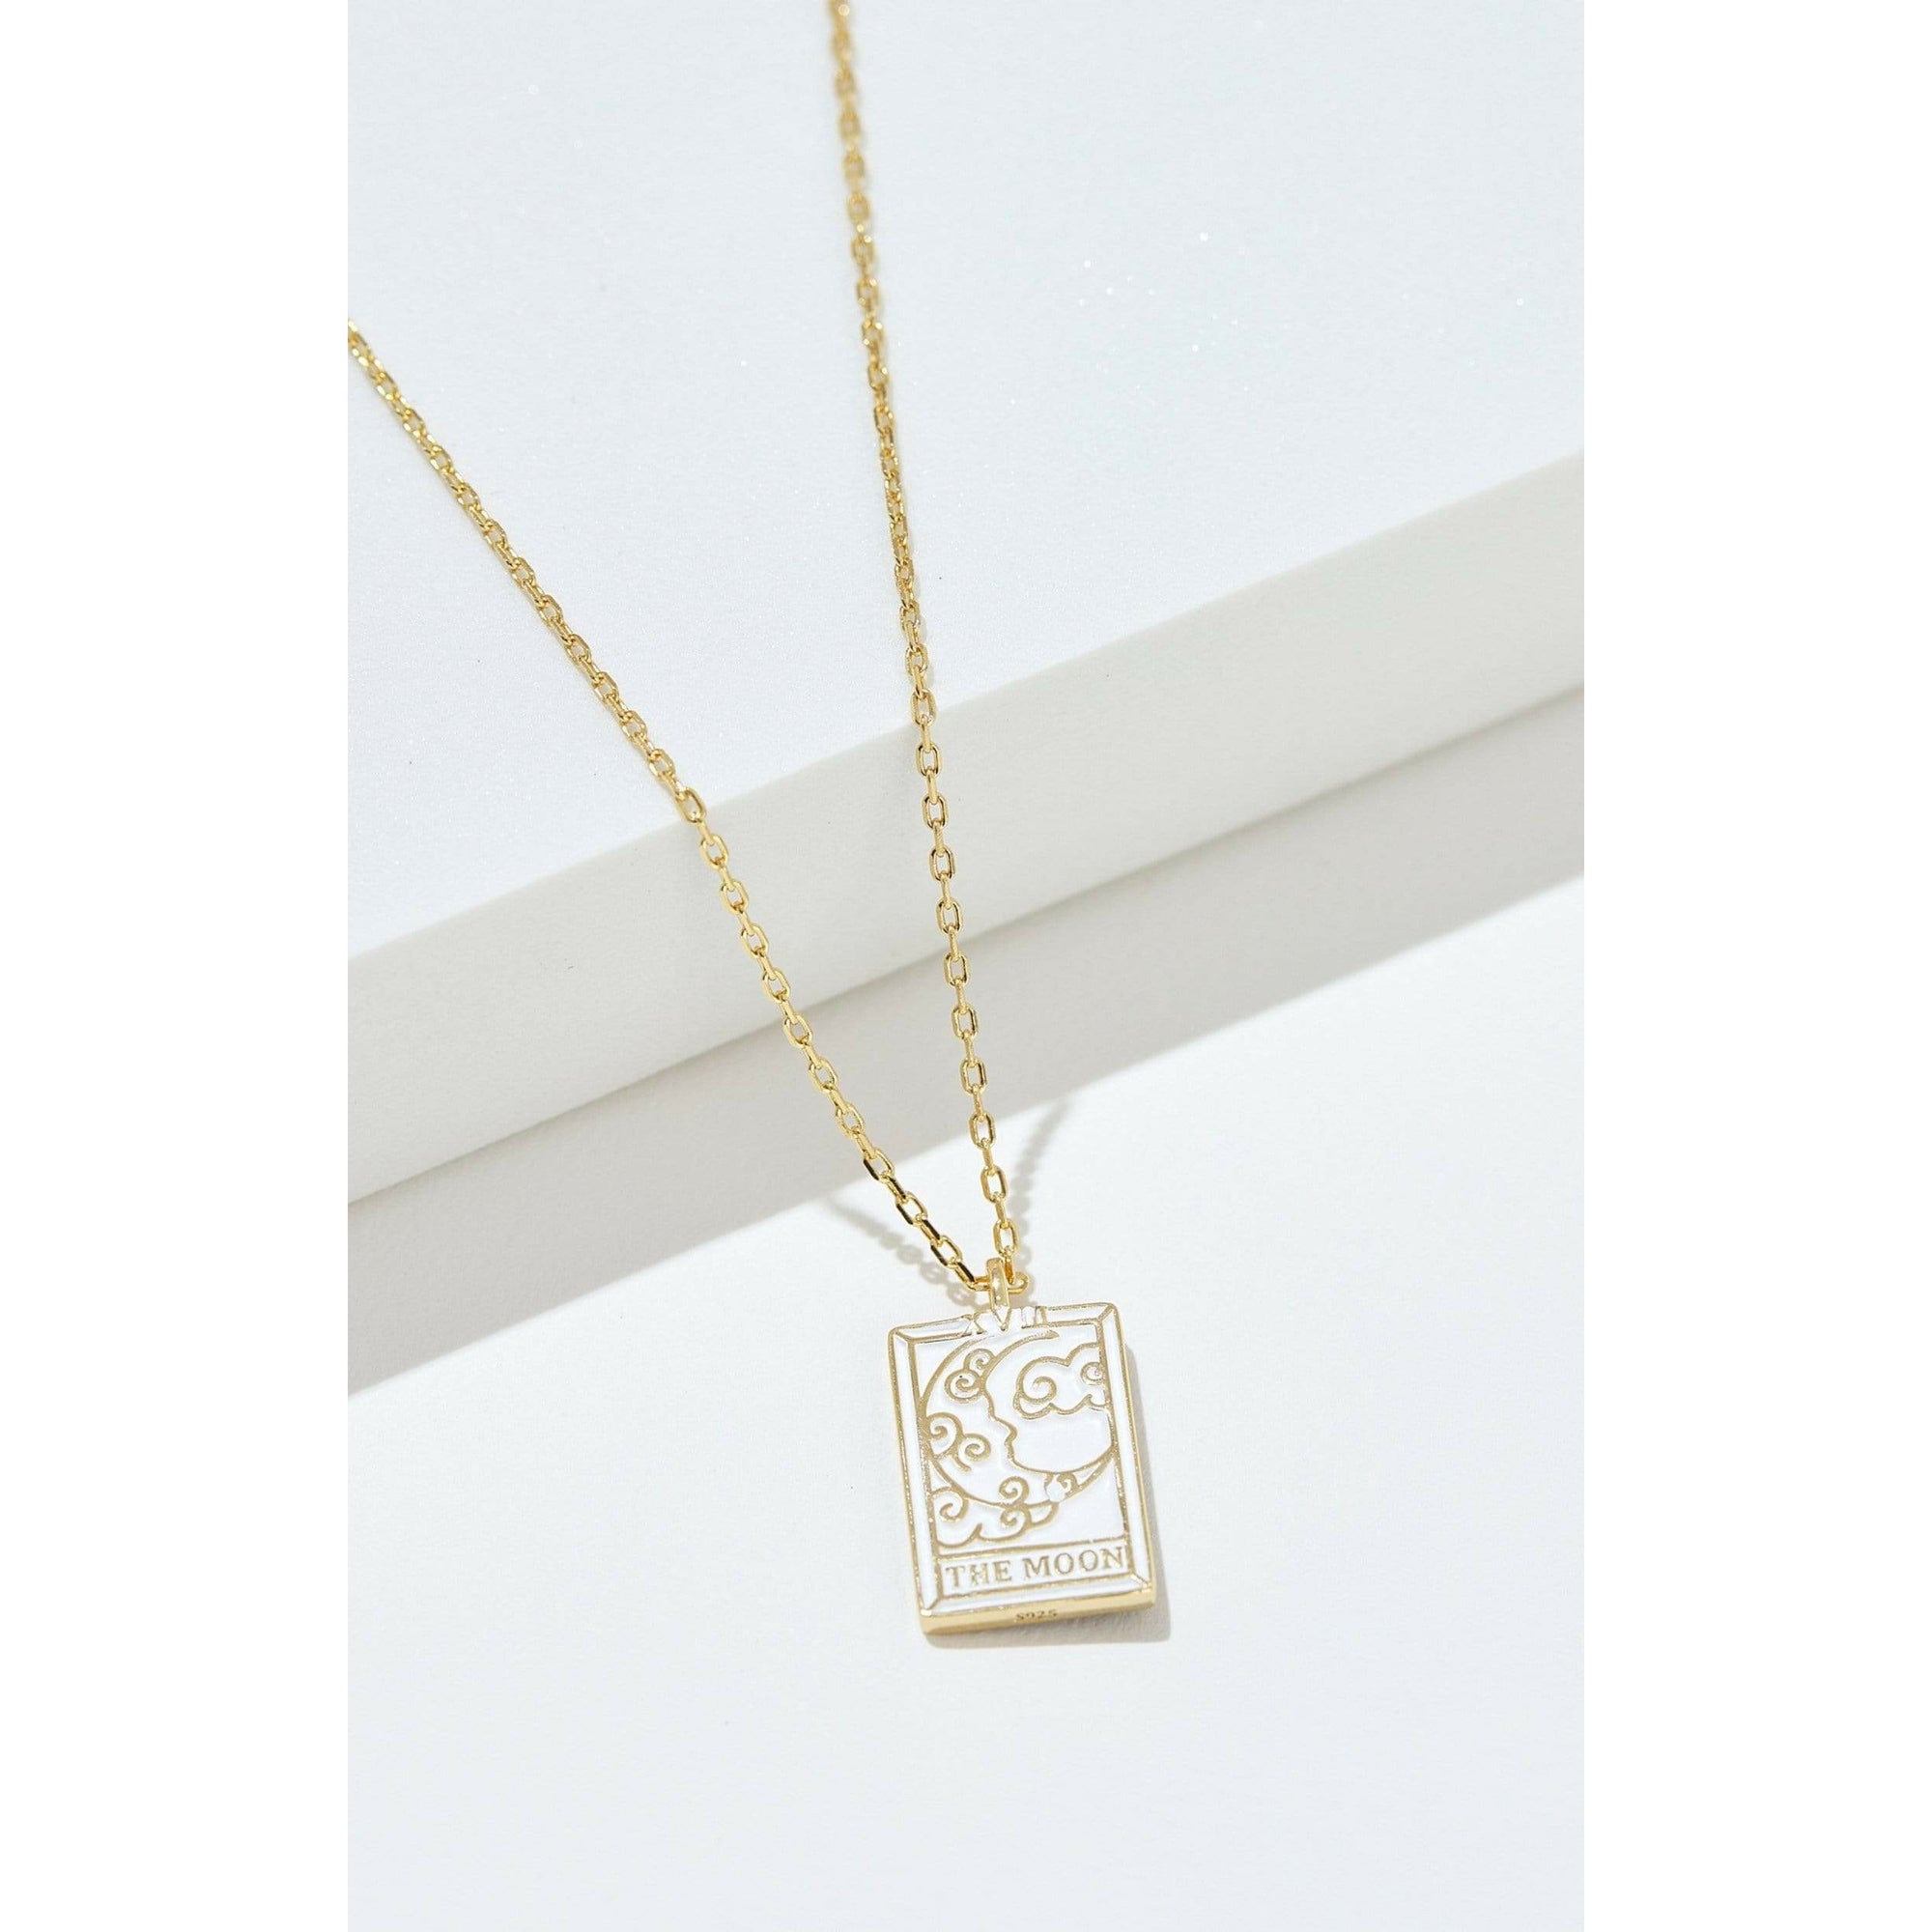 Fervor Montreal Necklace Tarot Card- The Moon Reversible Necklace